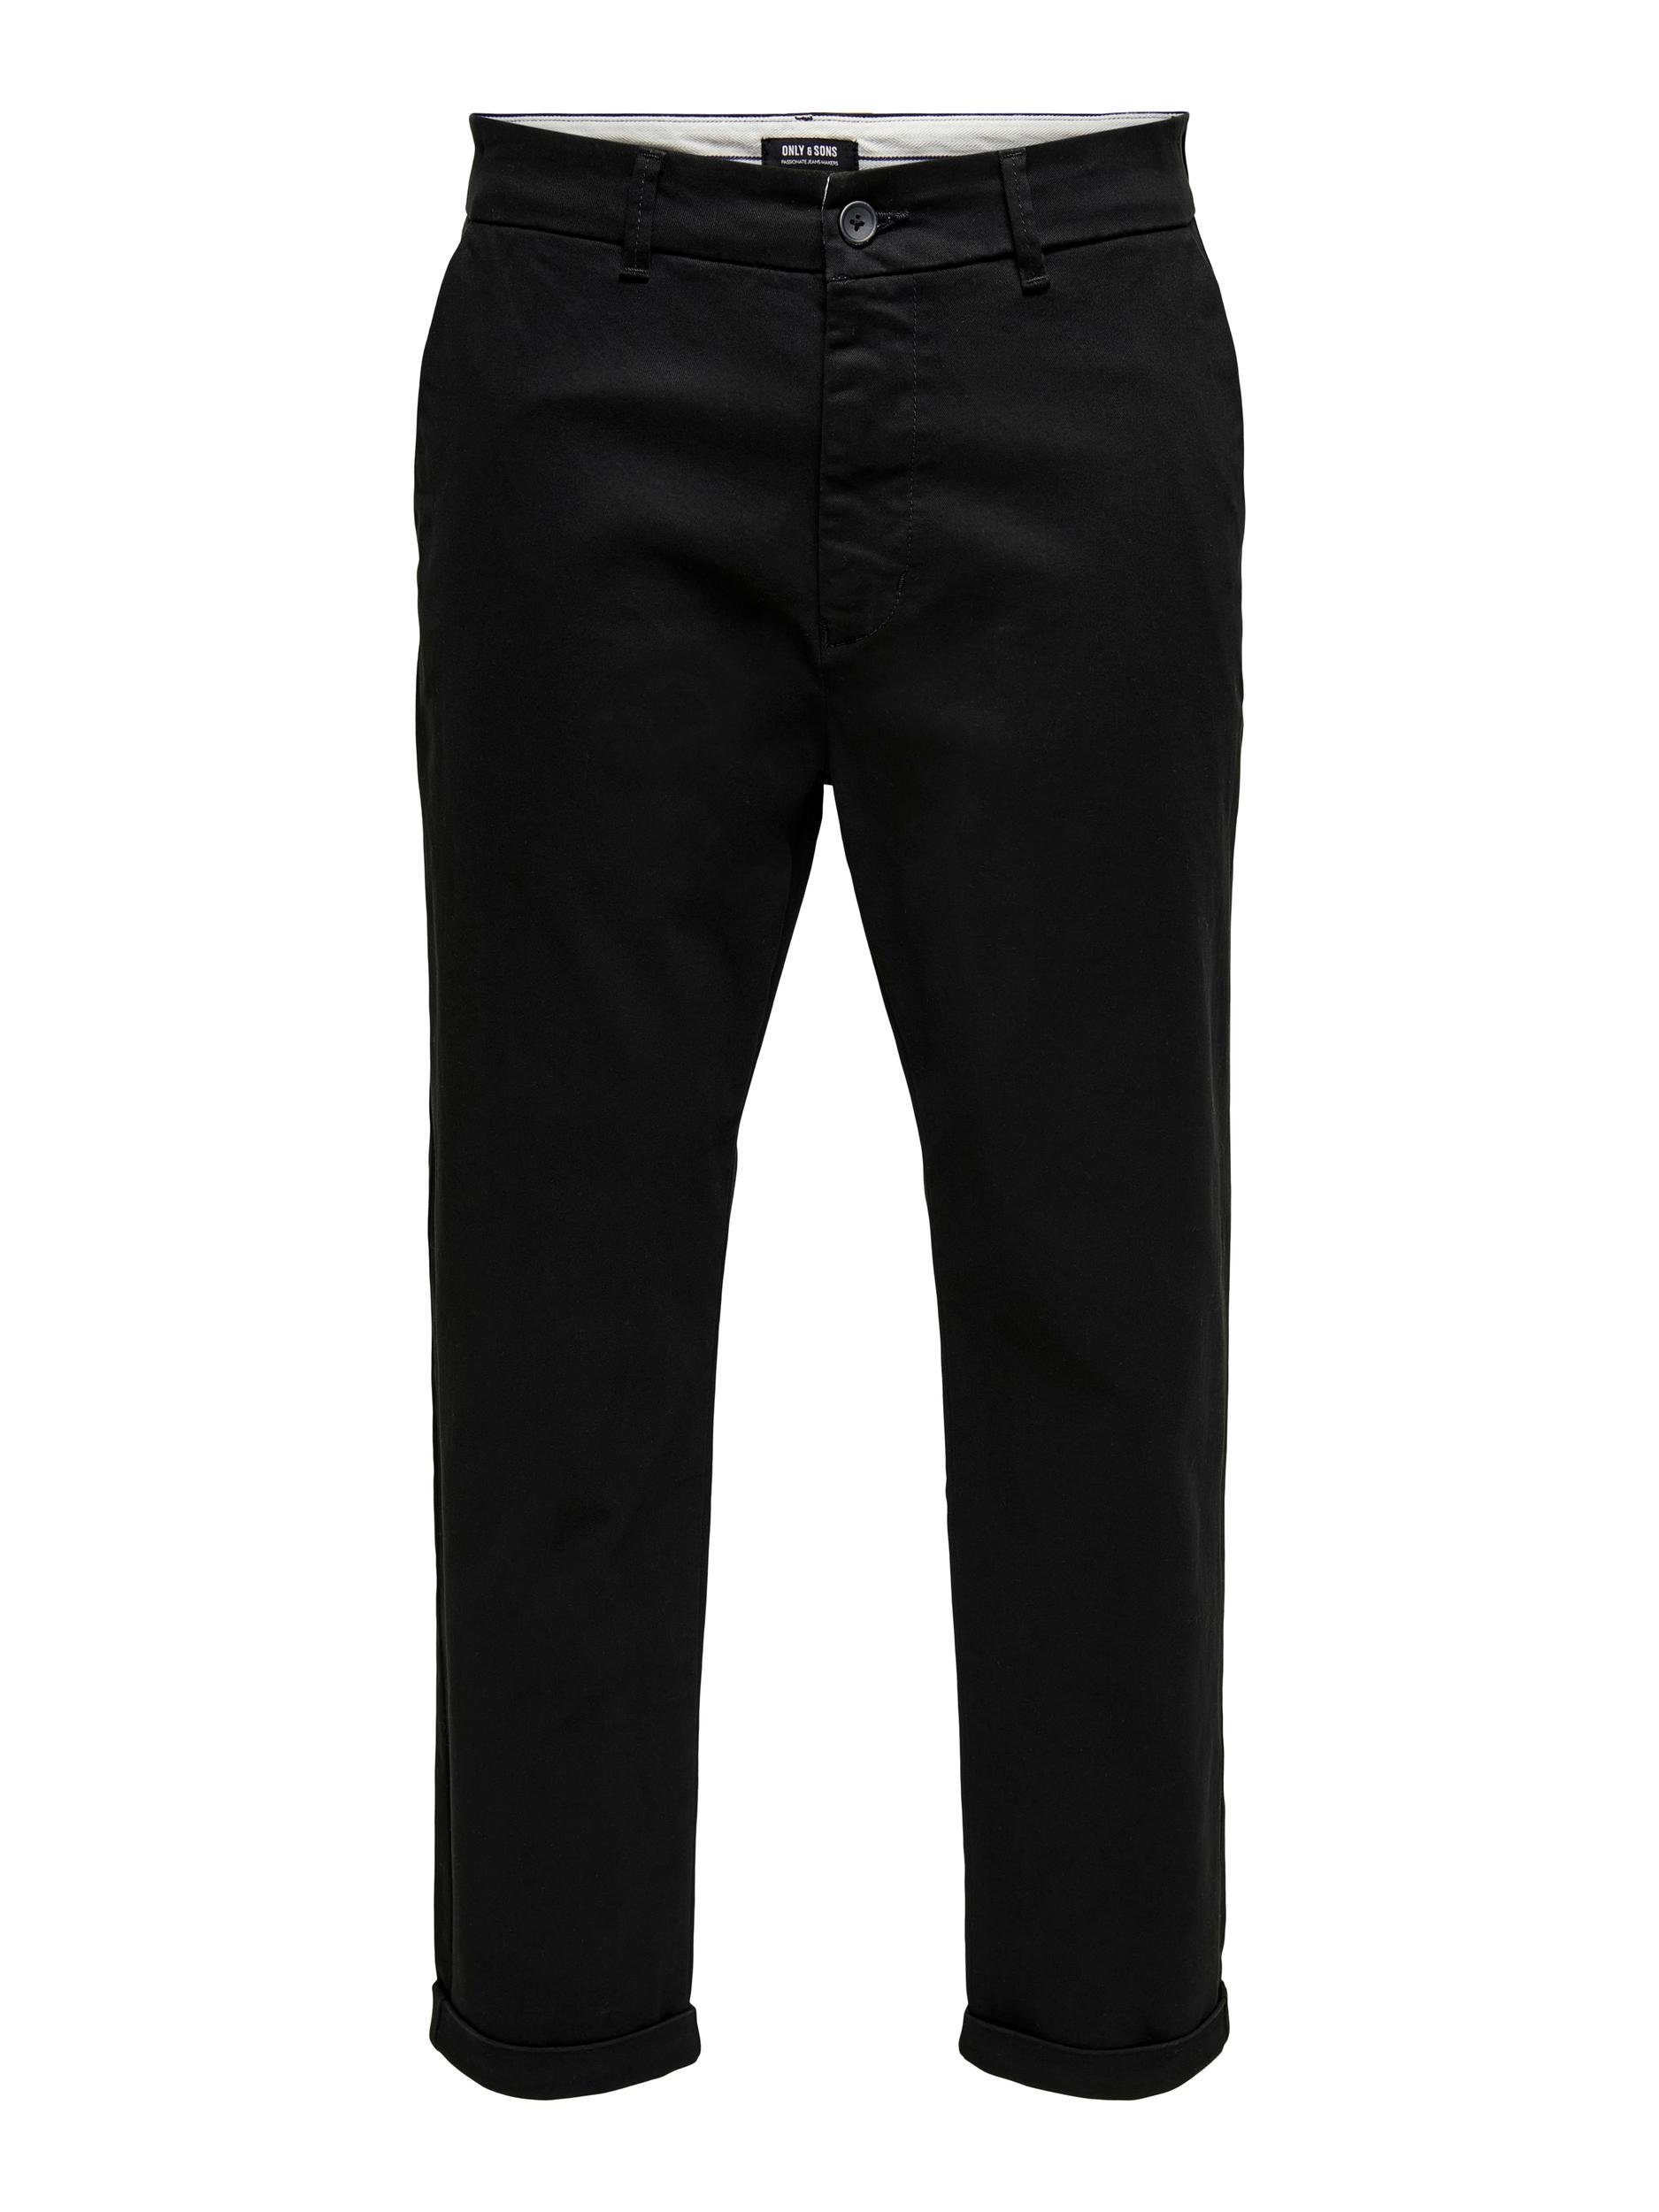 SONS & ONLY Chinohose black ONSKENT CHINO OS CROPPED